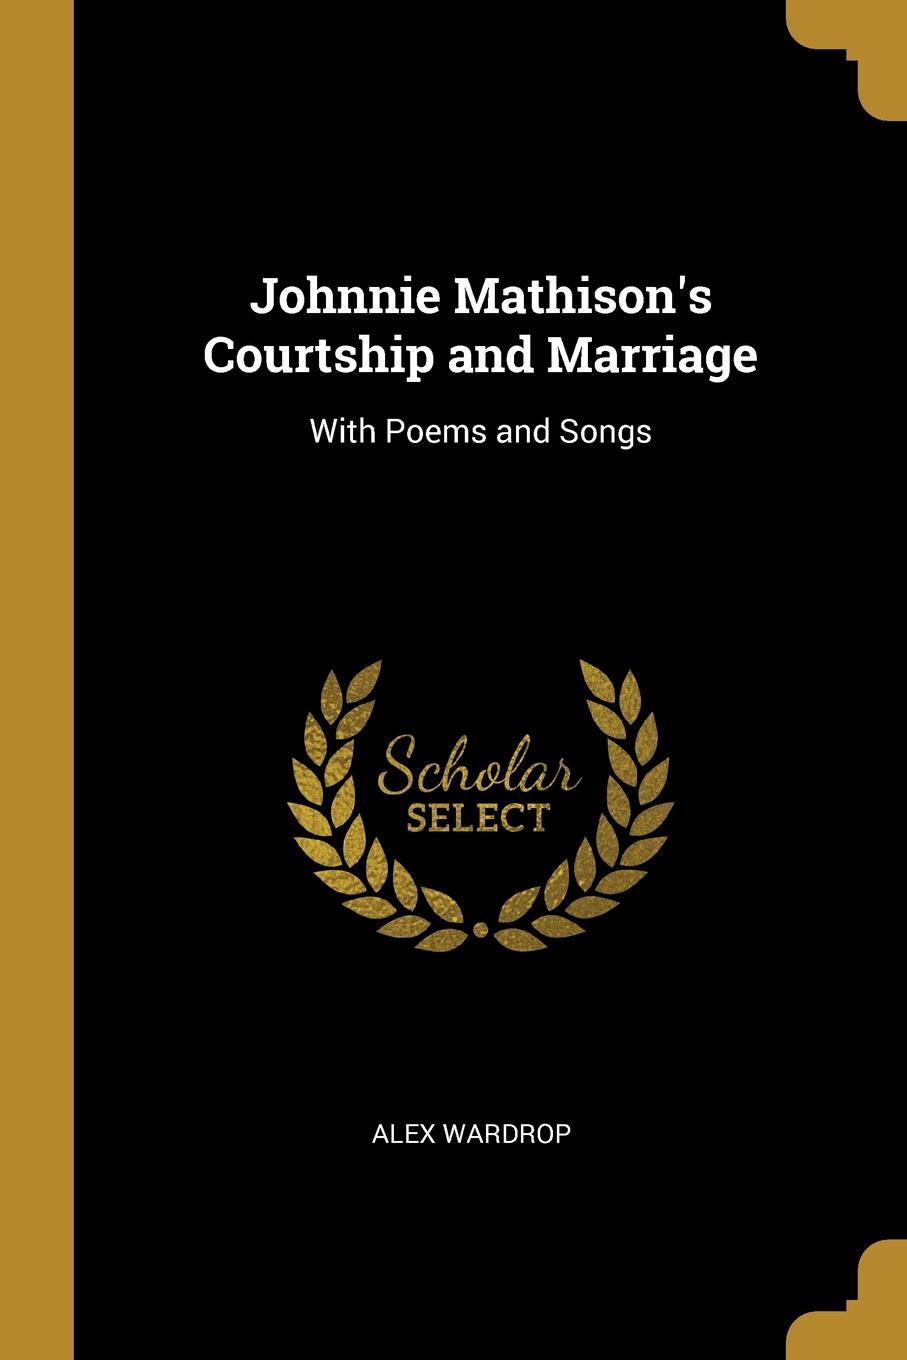 Johnnie Mathison.s Courtship and Marriage. With Poems and Songs